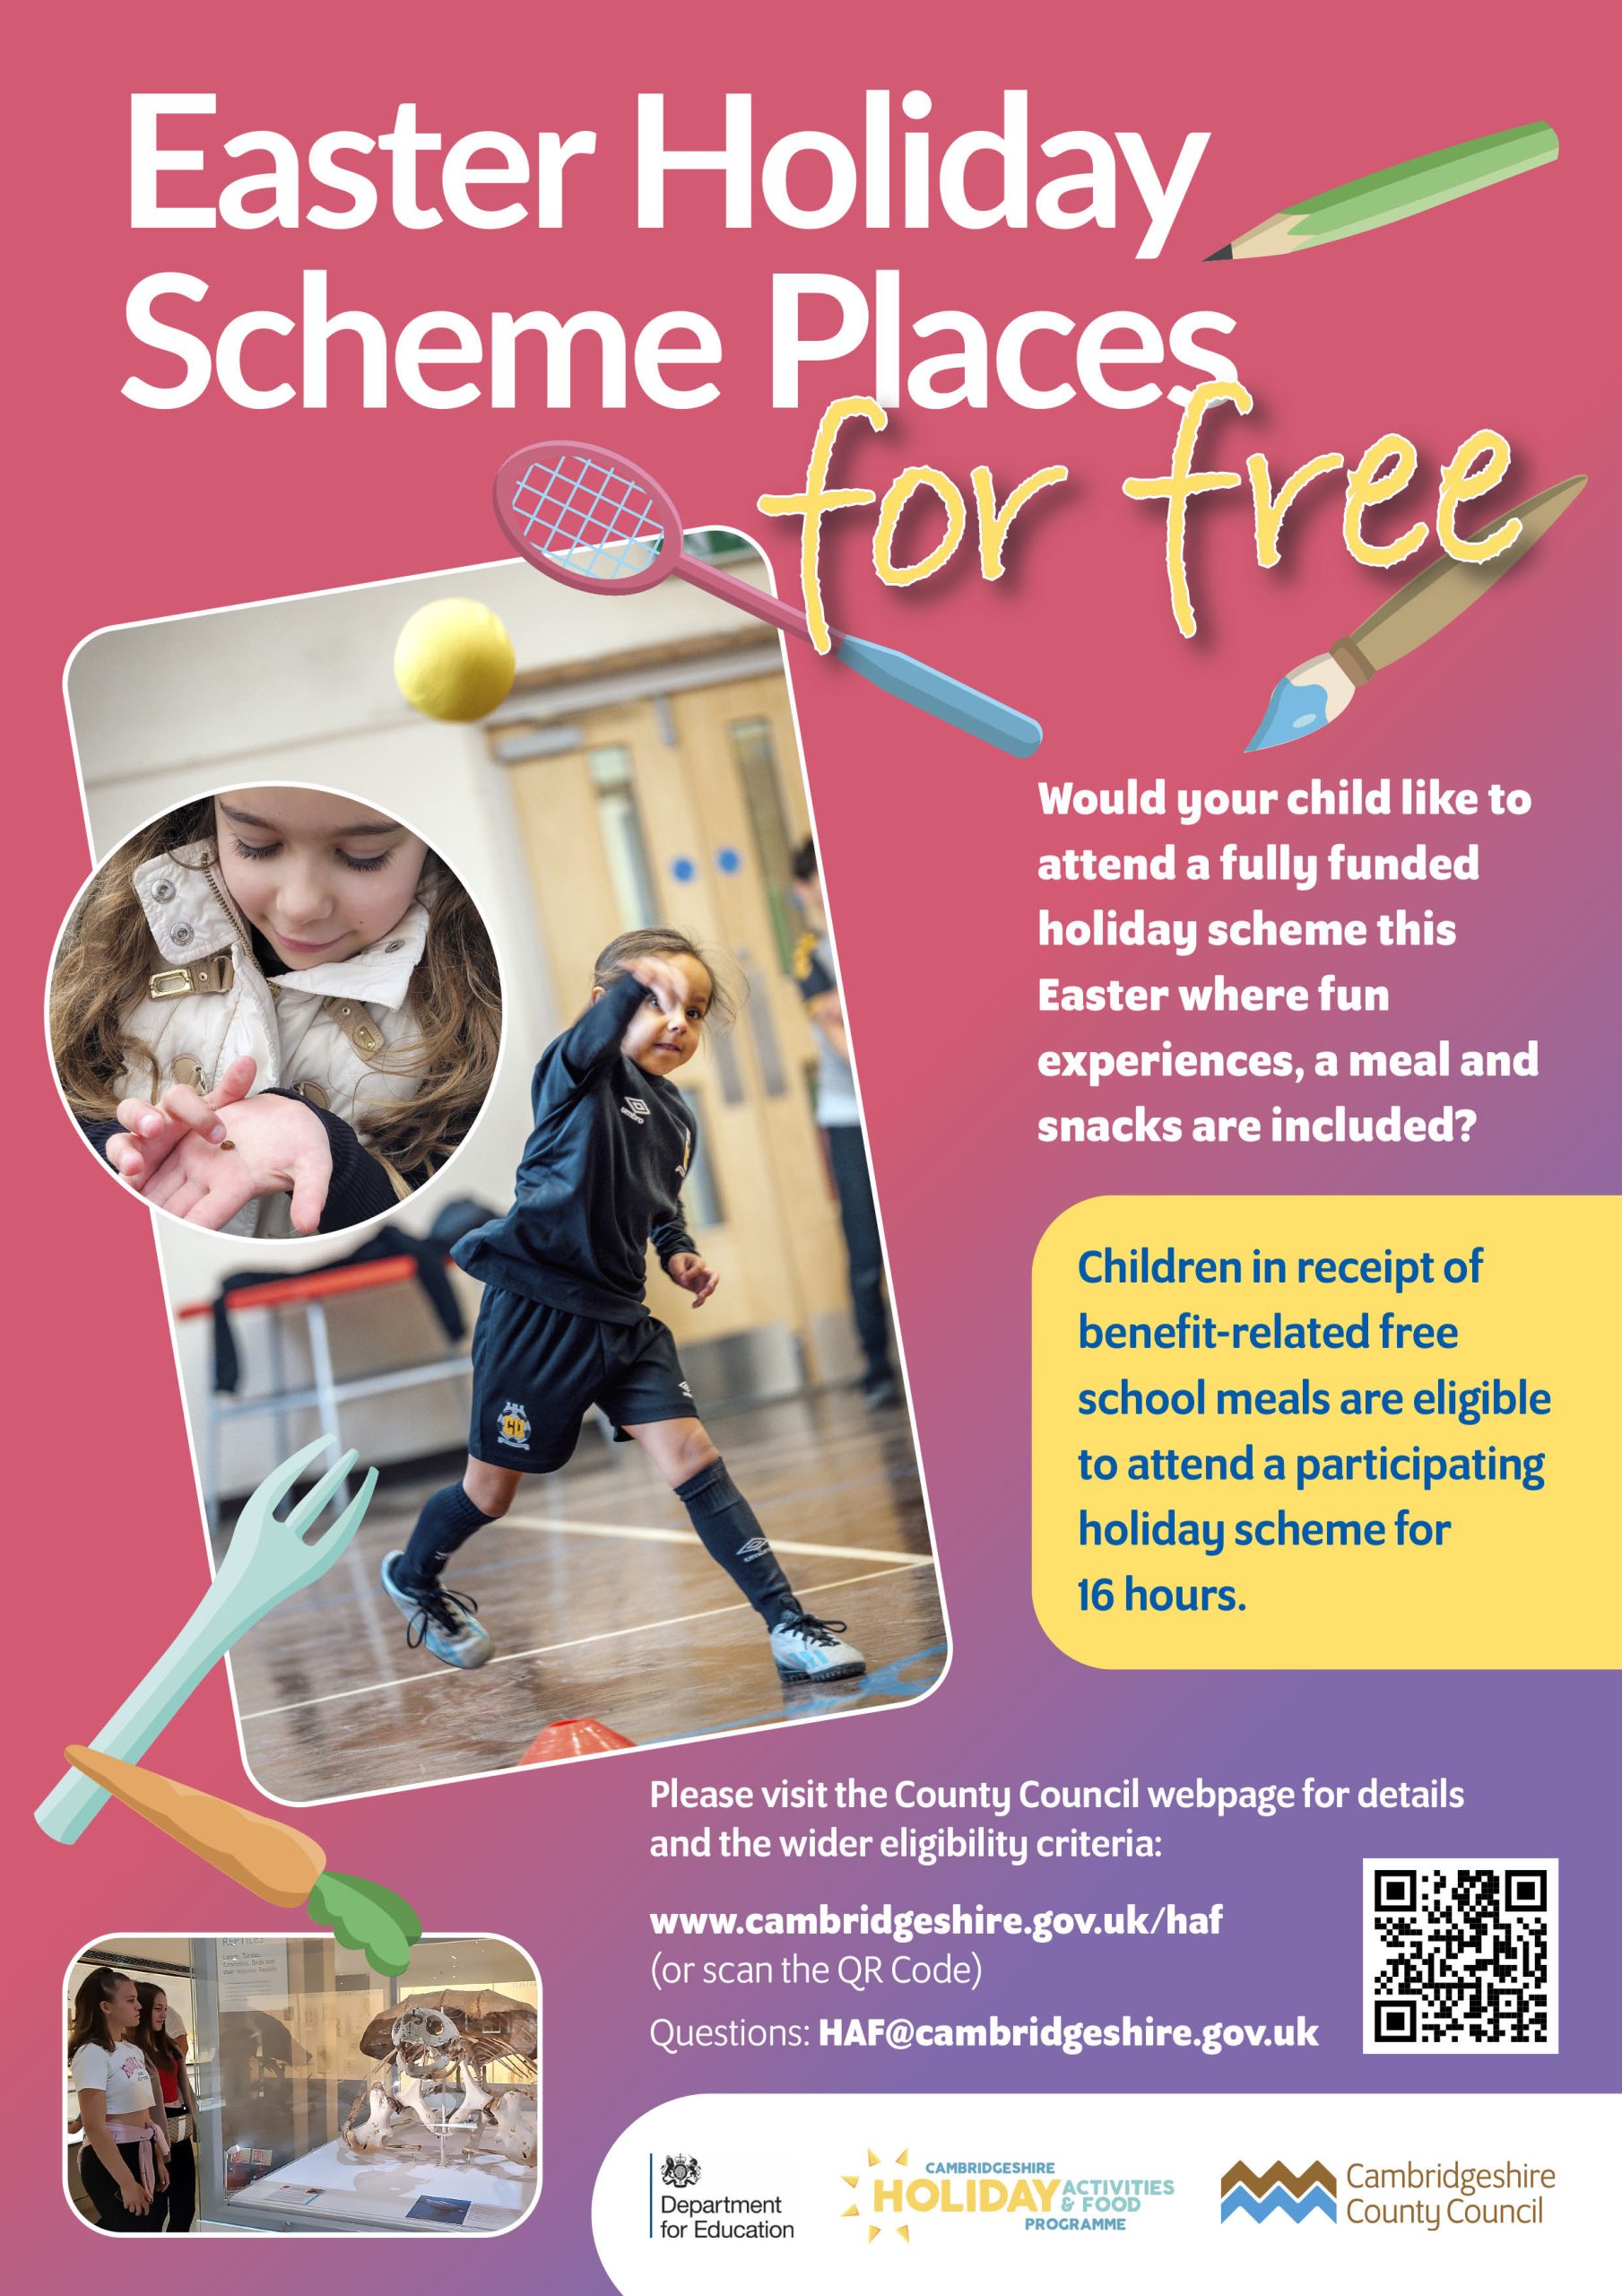 Easter Holiday Scheme Places for Free. For Children in receipt of benefit-related free school meals. 16 free hours available as per the holiday scheme. 